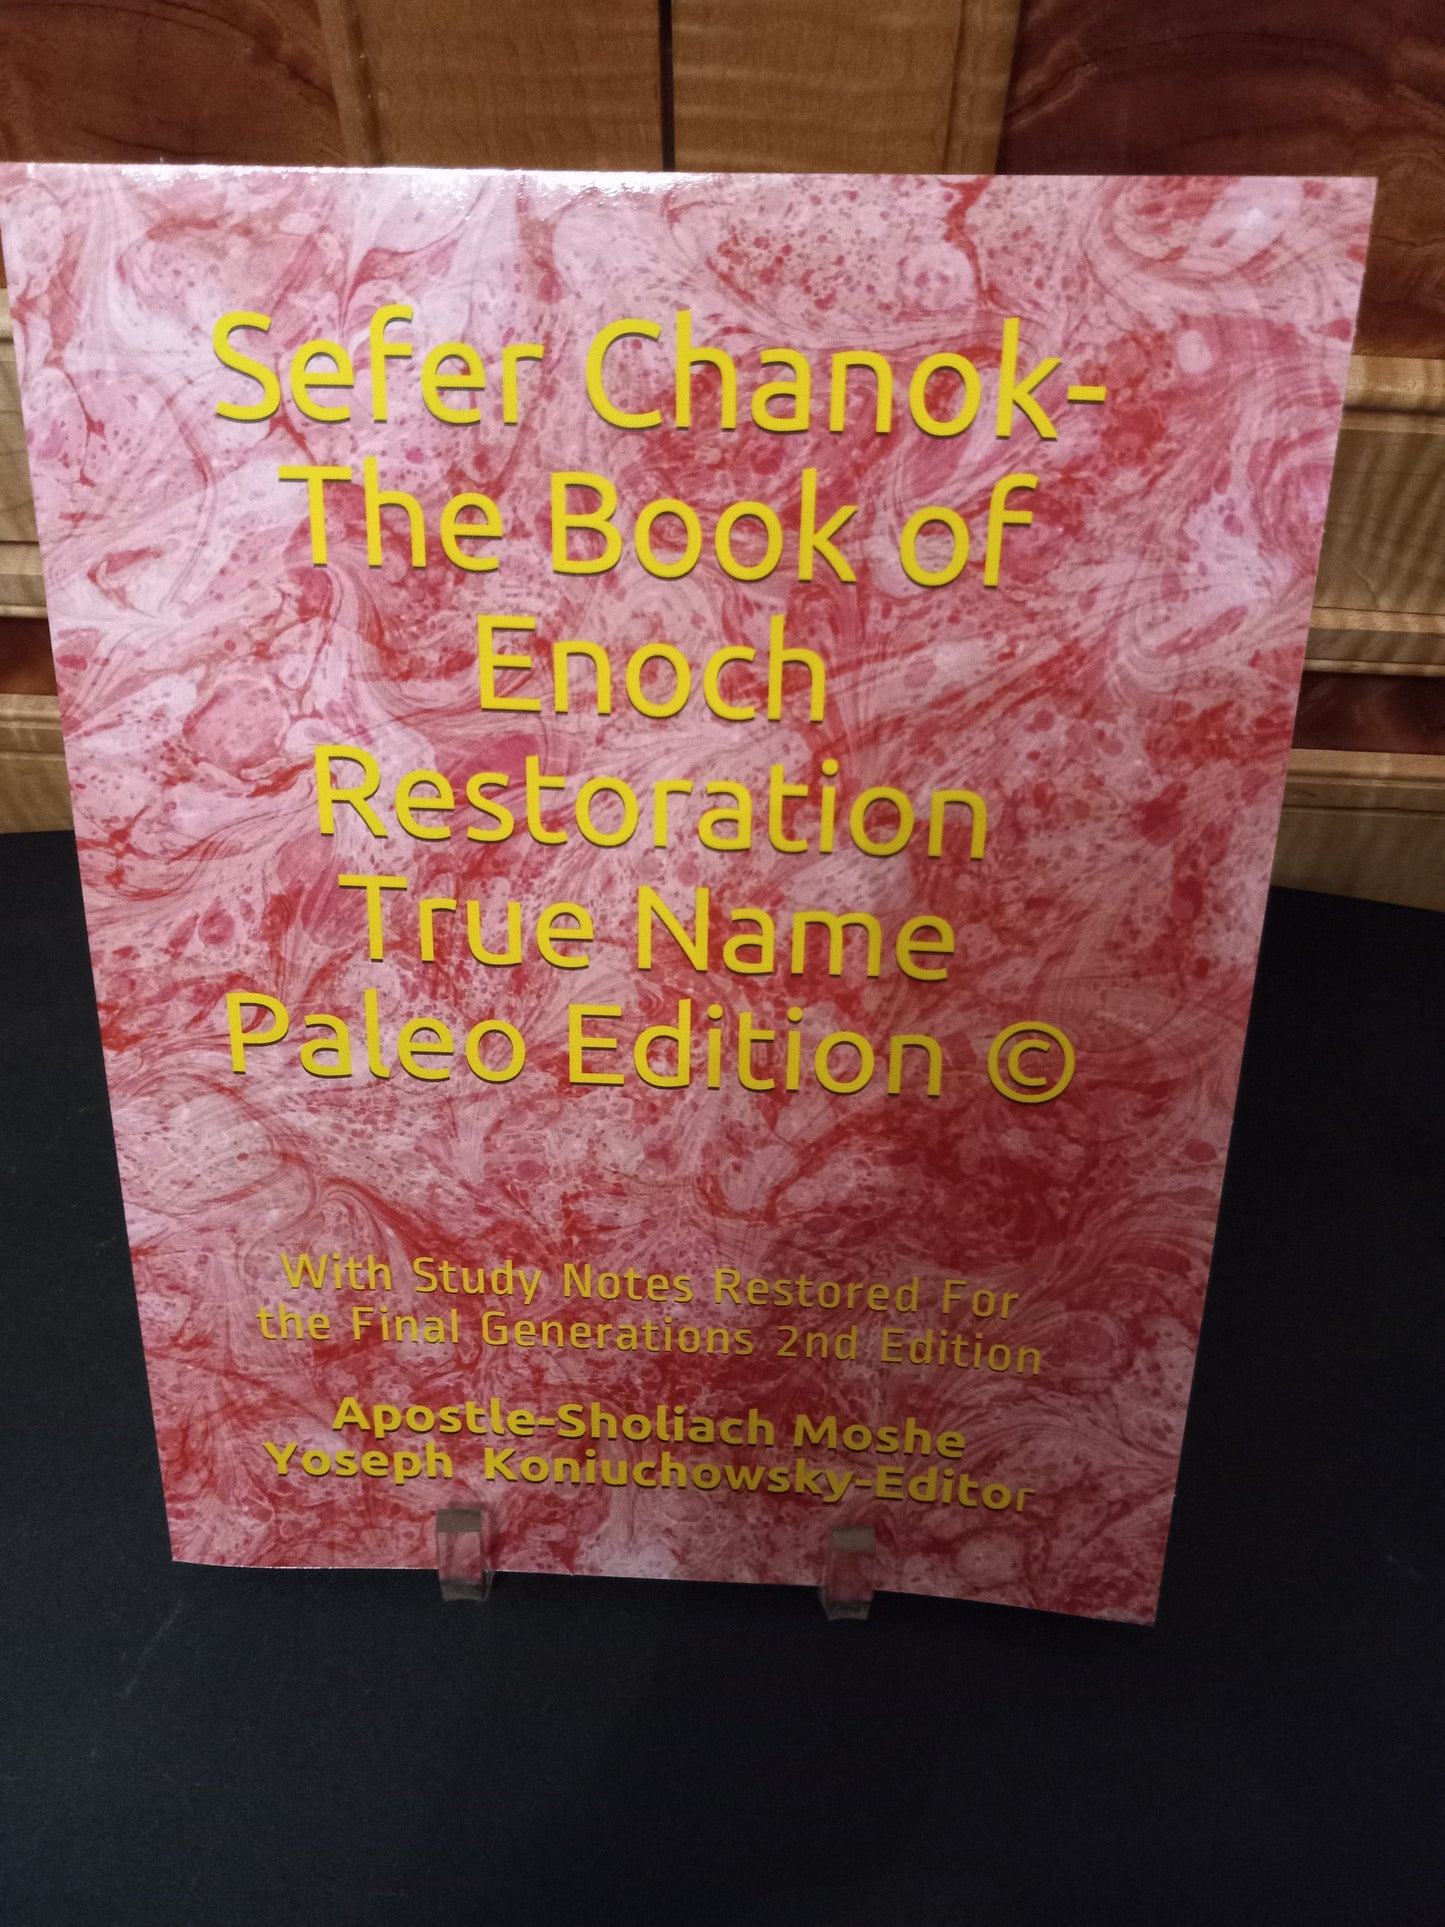 Sefer Chanok-The Book of Enoch Restoration True Name Paleo Edition ©: With Study Notes Restored For the Final Generations 2nd Edition Paperback